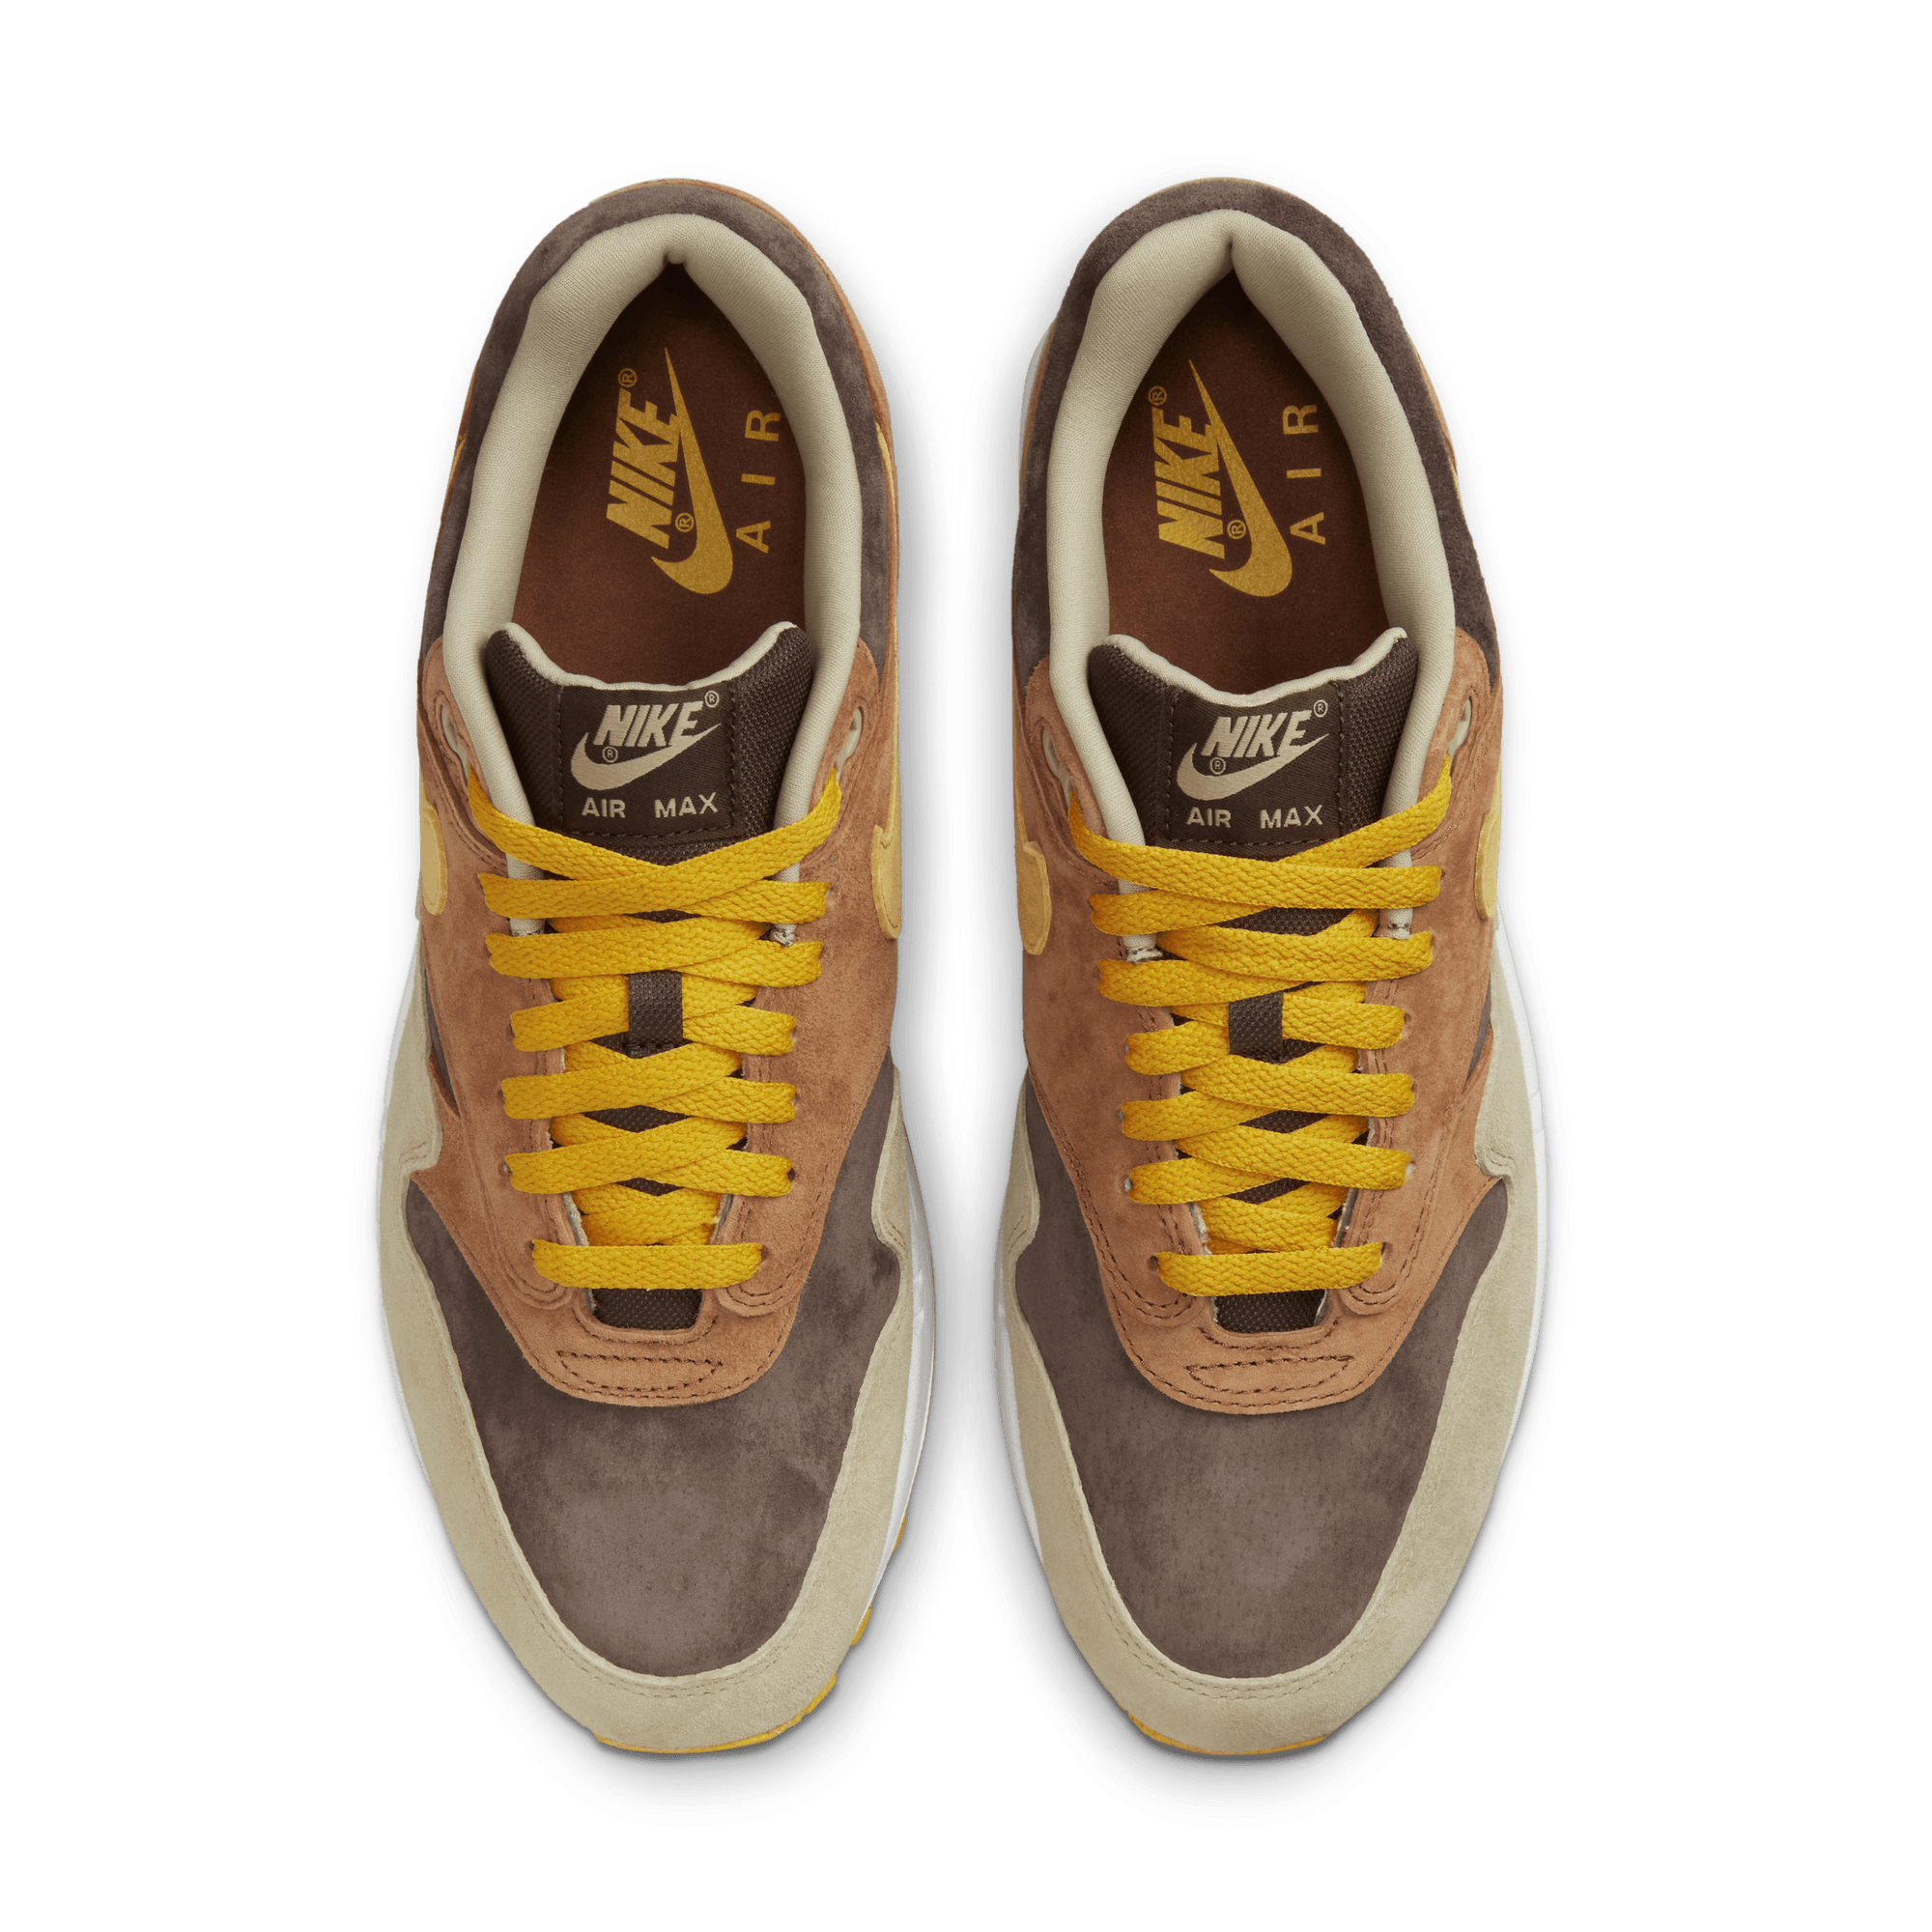 Lagere school Dinkarville mei Nike Air Max 1 Premium Ugly Duckling - Men's - GBNY